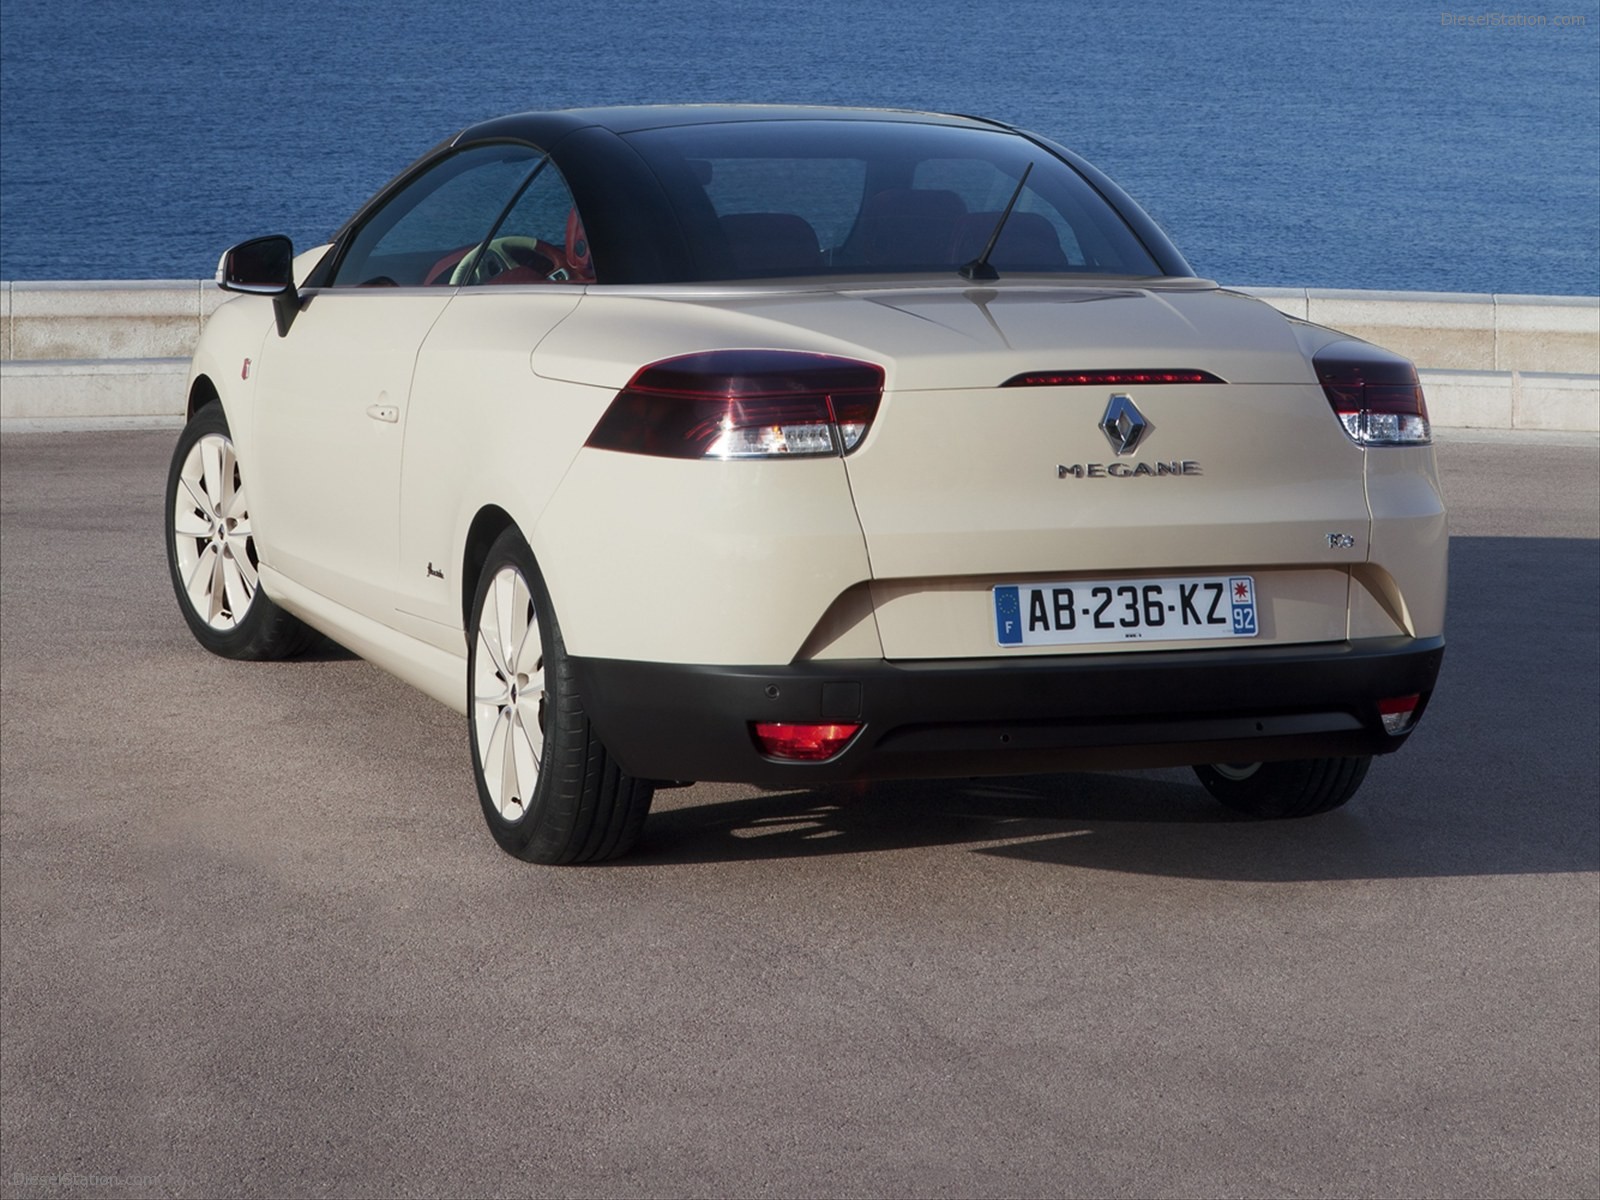 2015 Renault Megane Coupe-Cabriolet Wallpapers